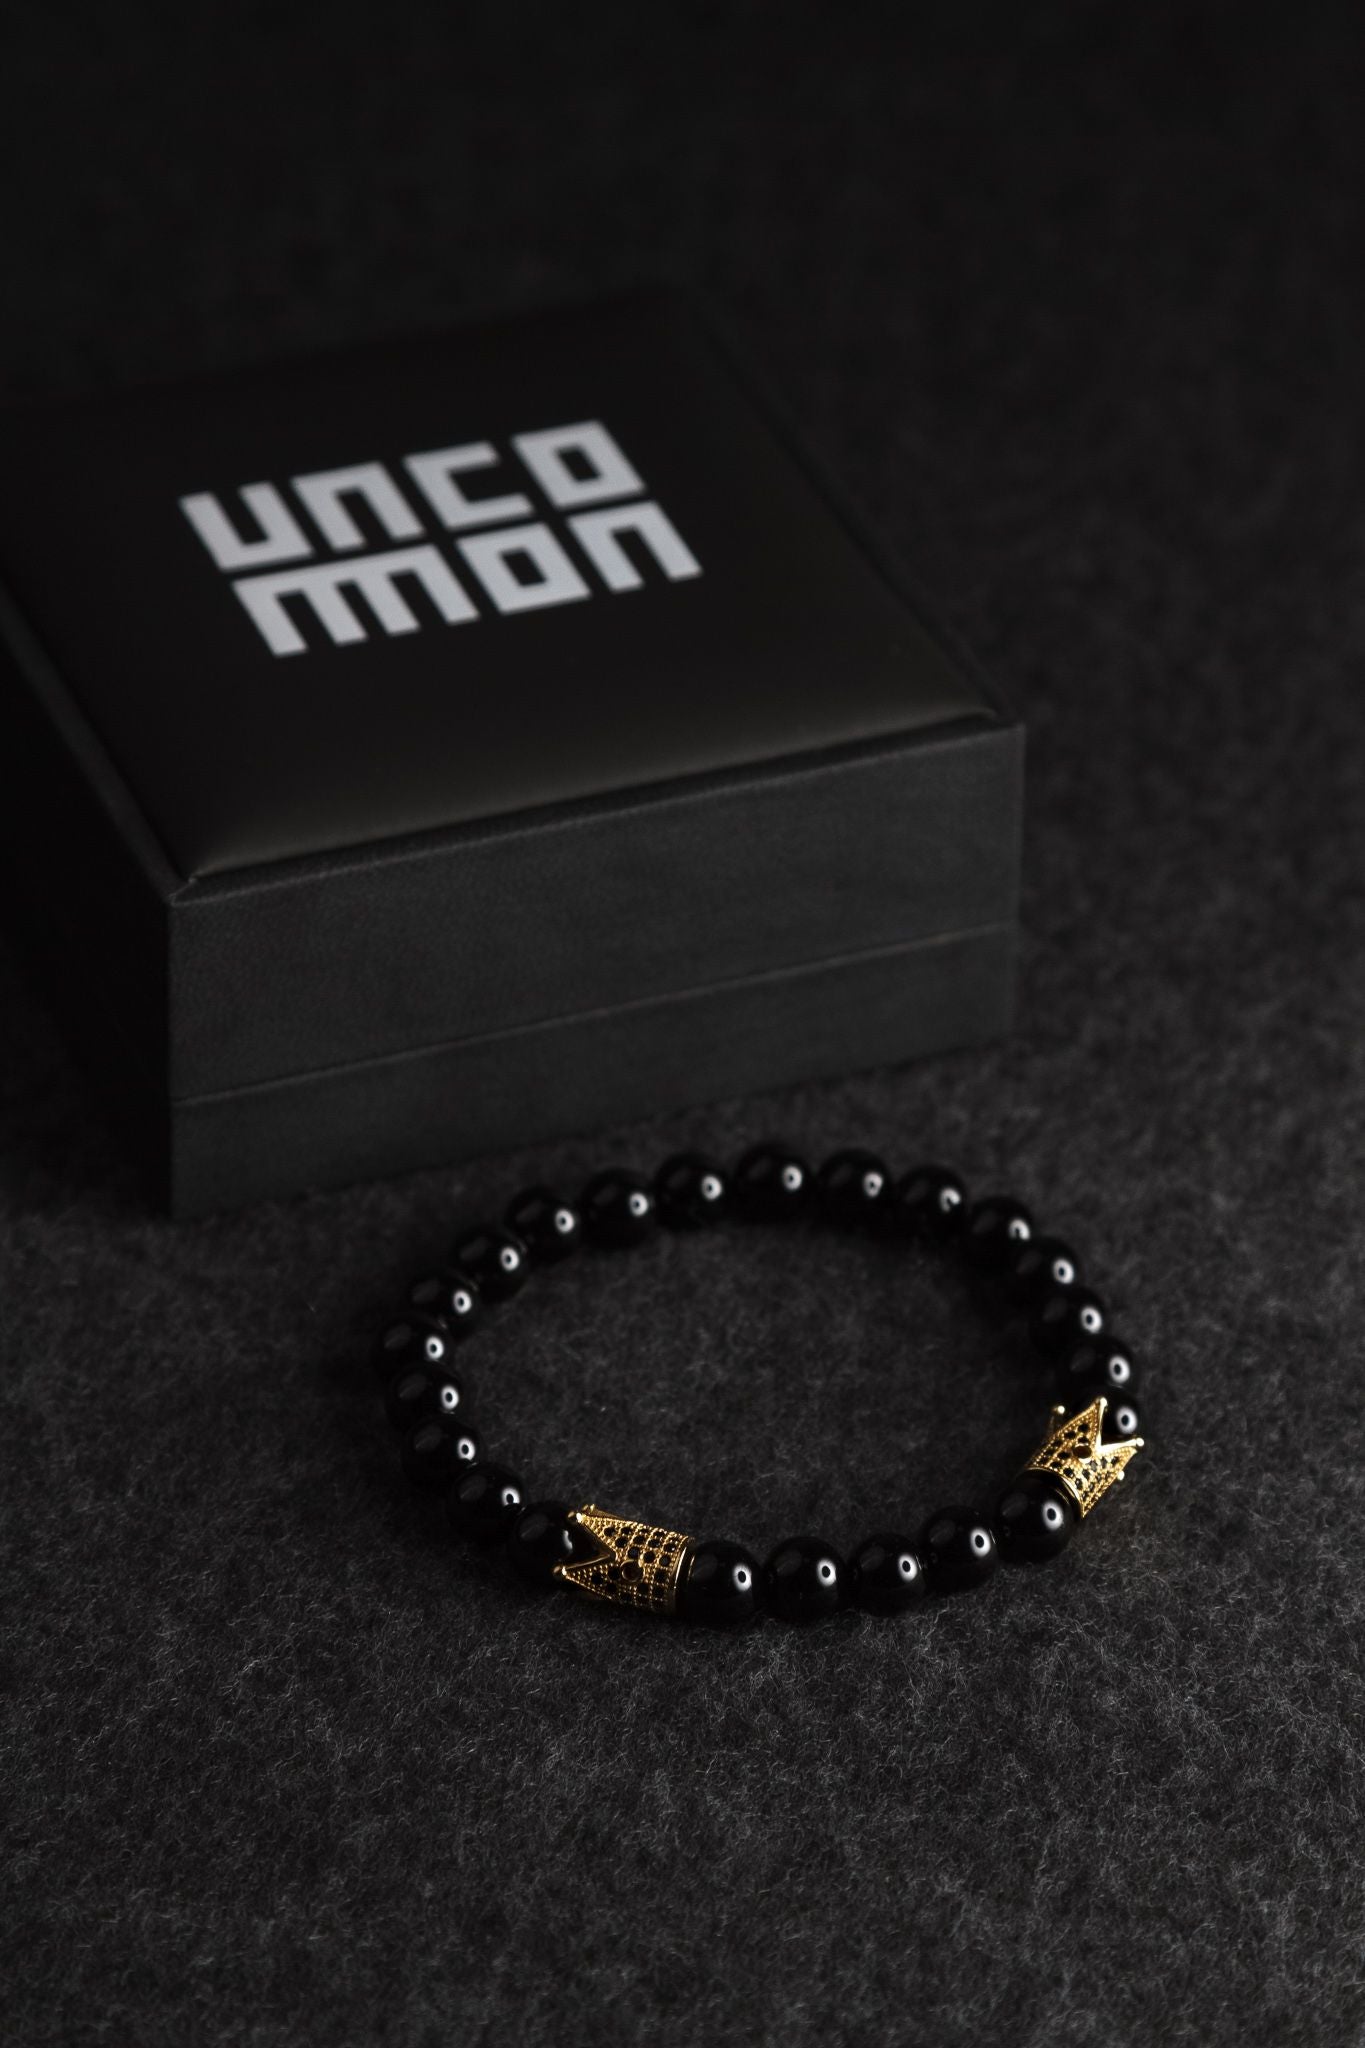 UNCOMMON Men's Beads Bracelet Two Gold Crown Charms Black Onyx Beads